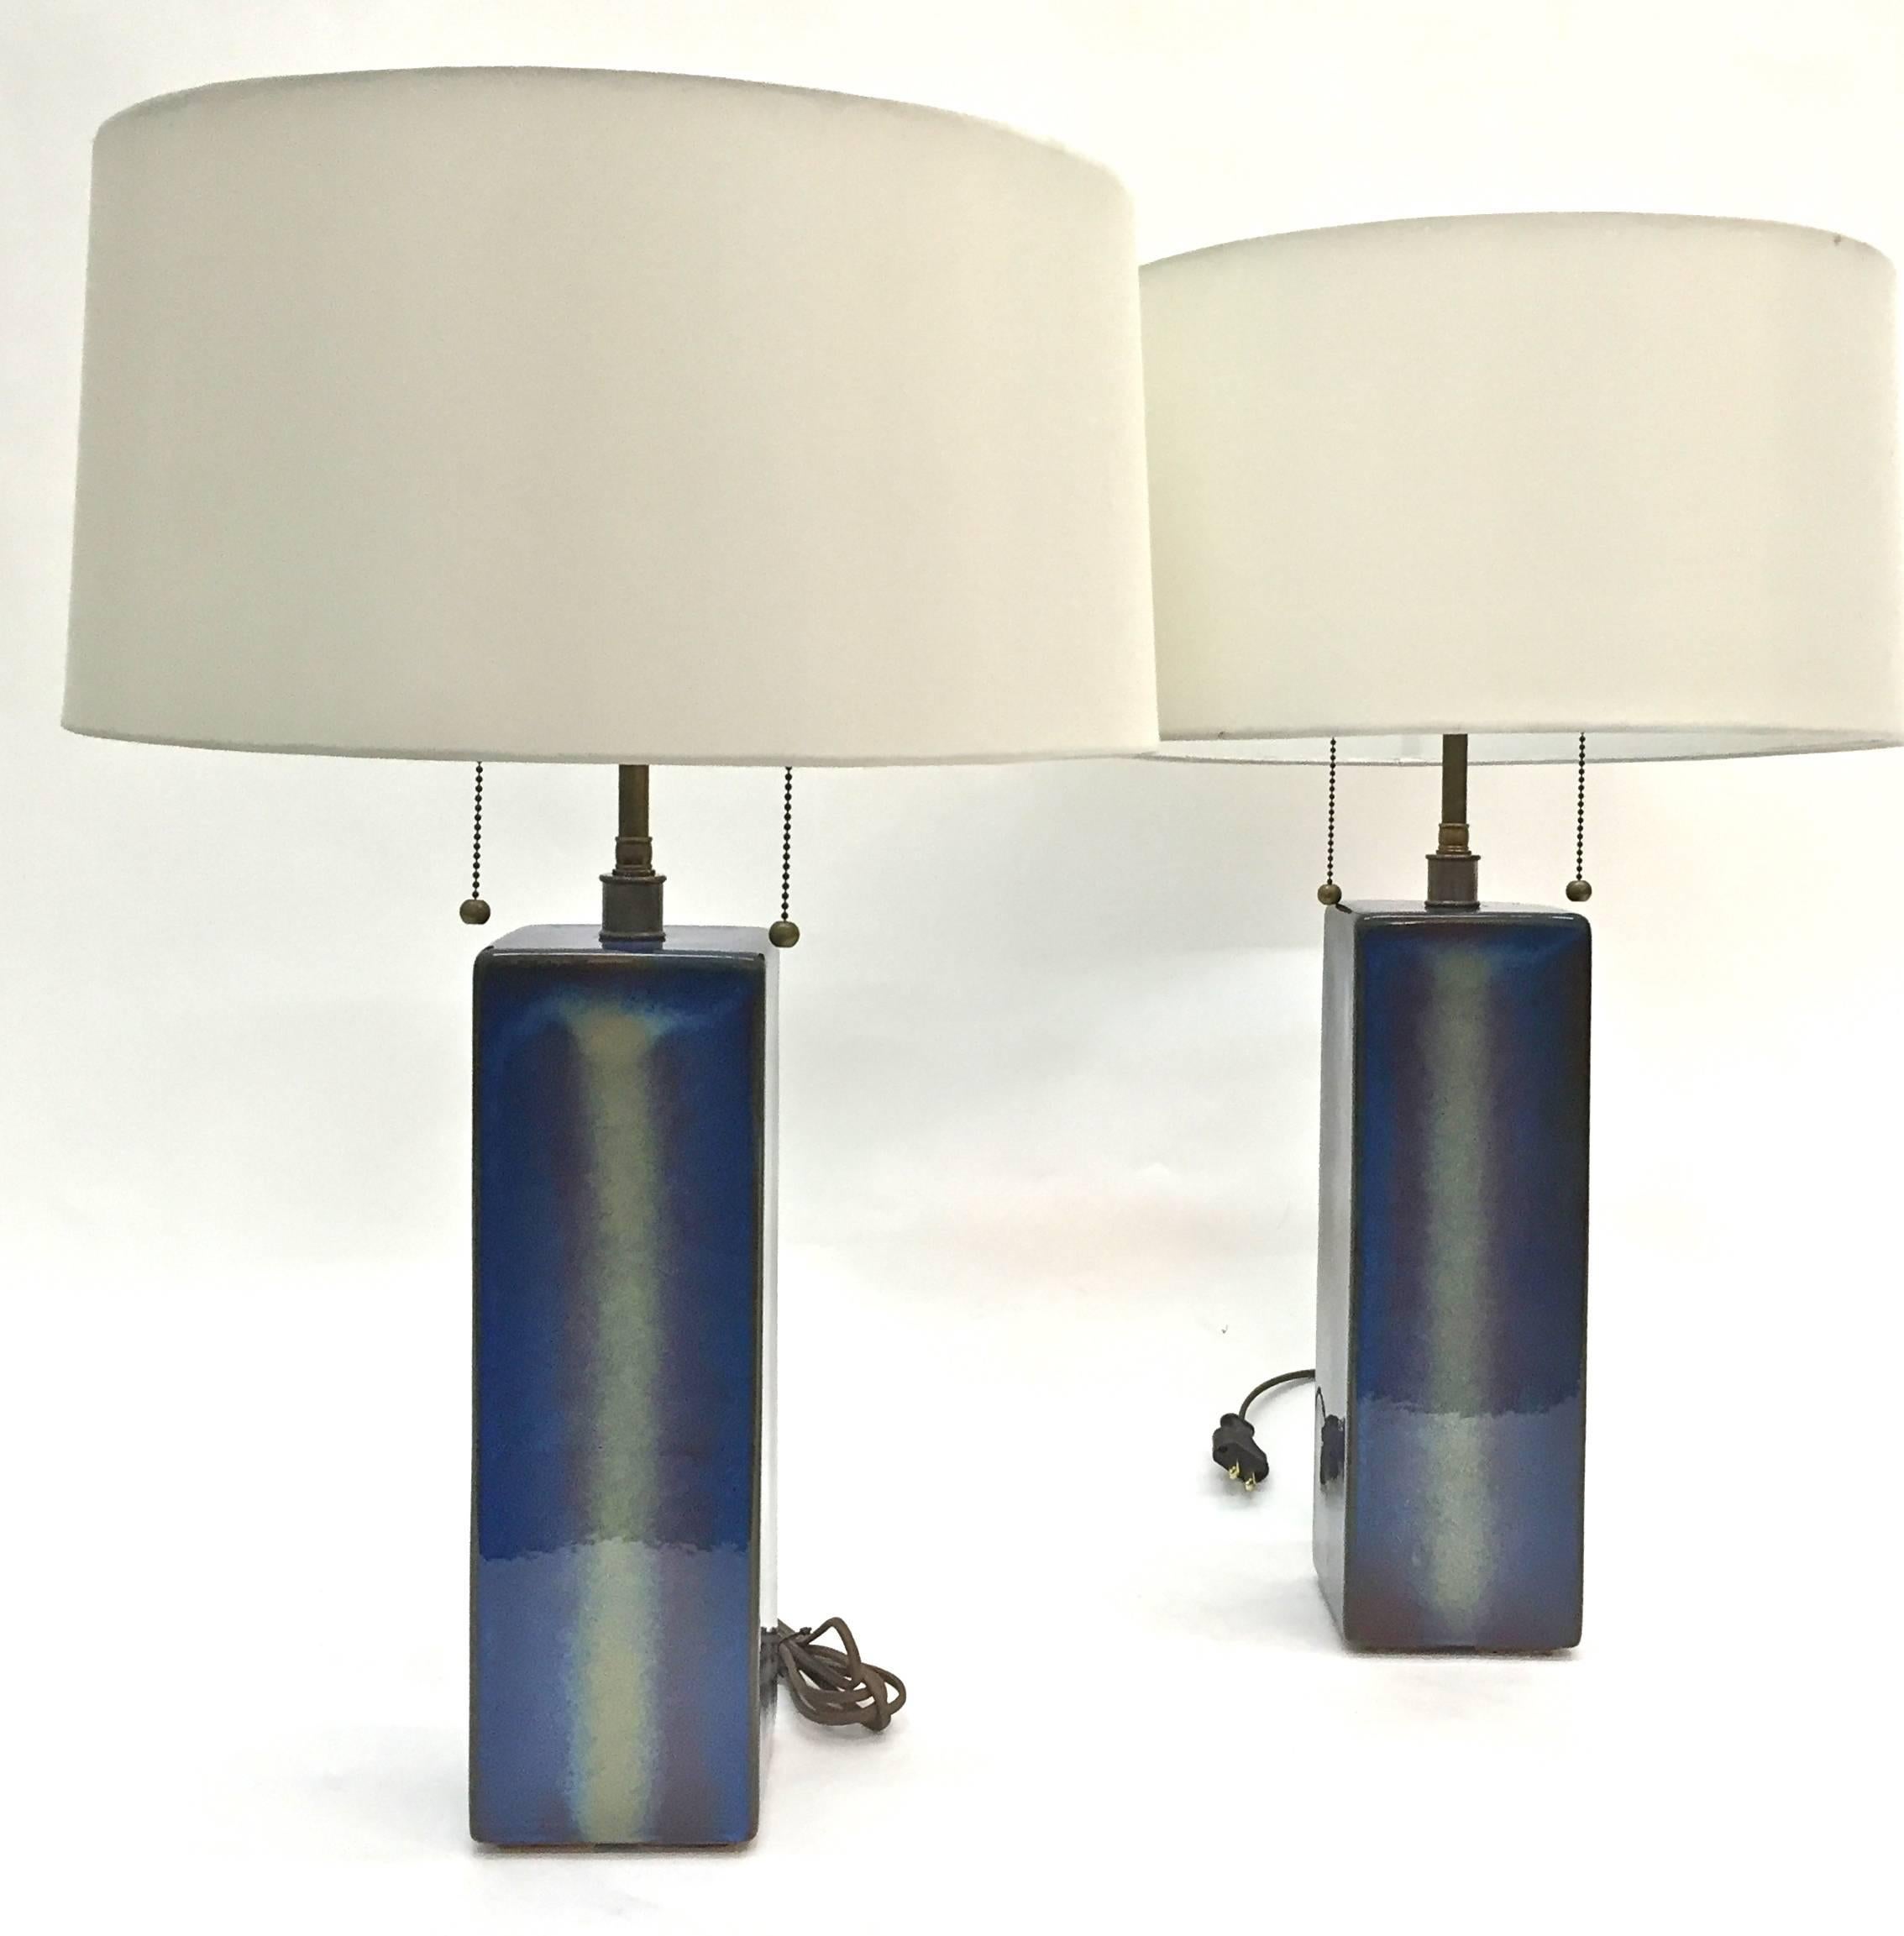 A pair of table lamp by Soholm Pottery, Denmark, circa 1960s. Glazed stoneware . Marked by manufacturer, signed by artist. Measures: Height 27